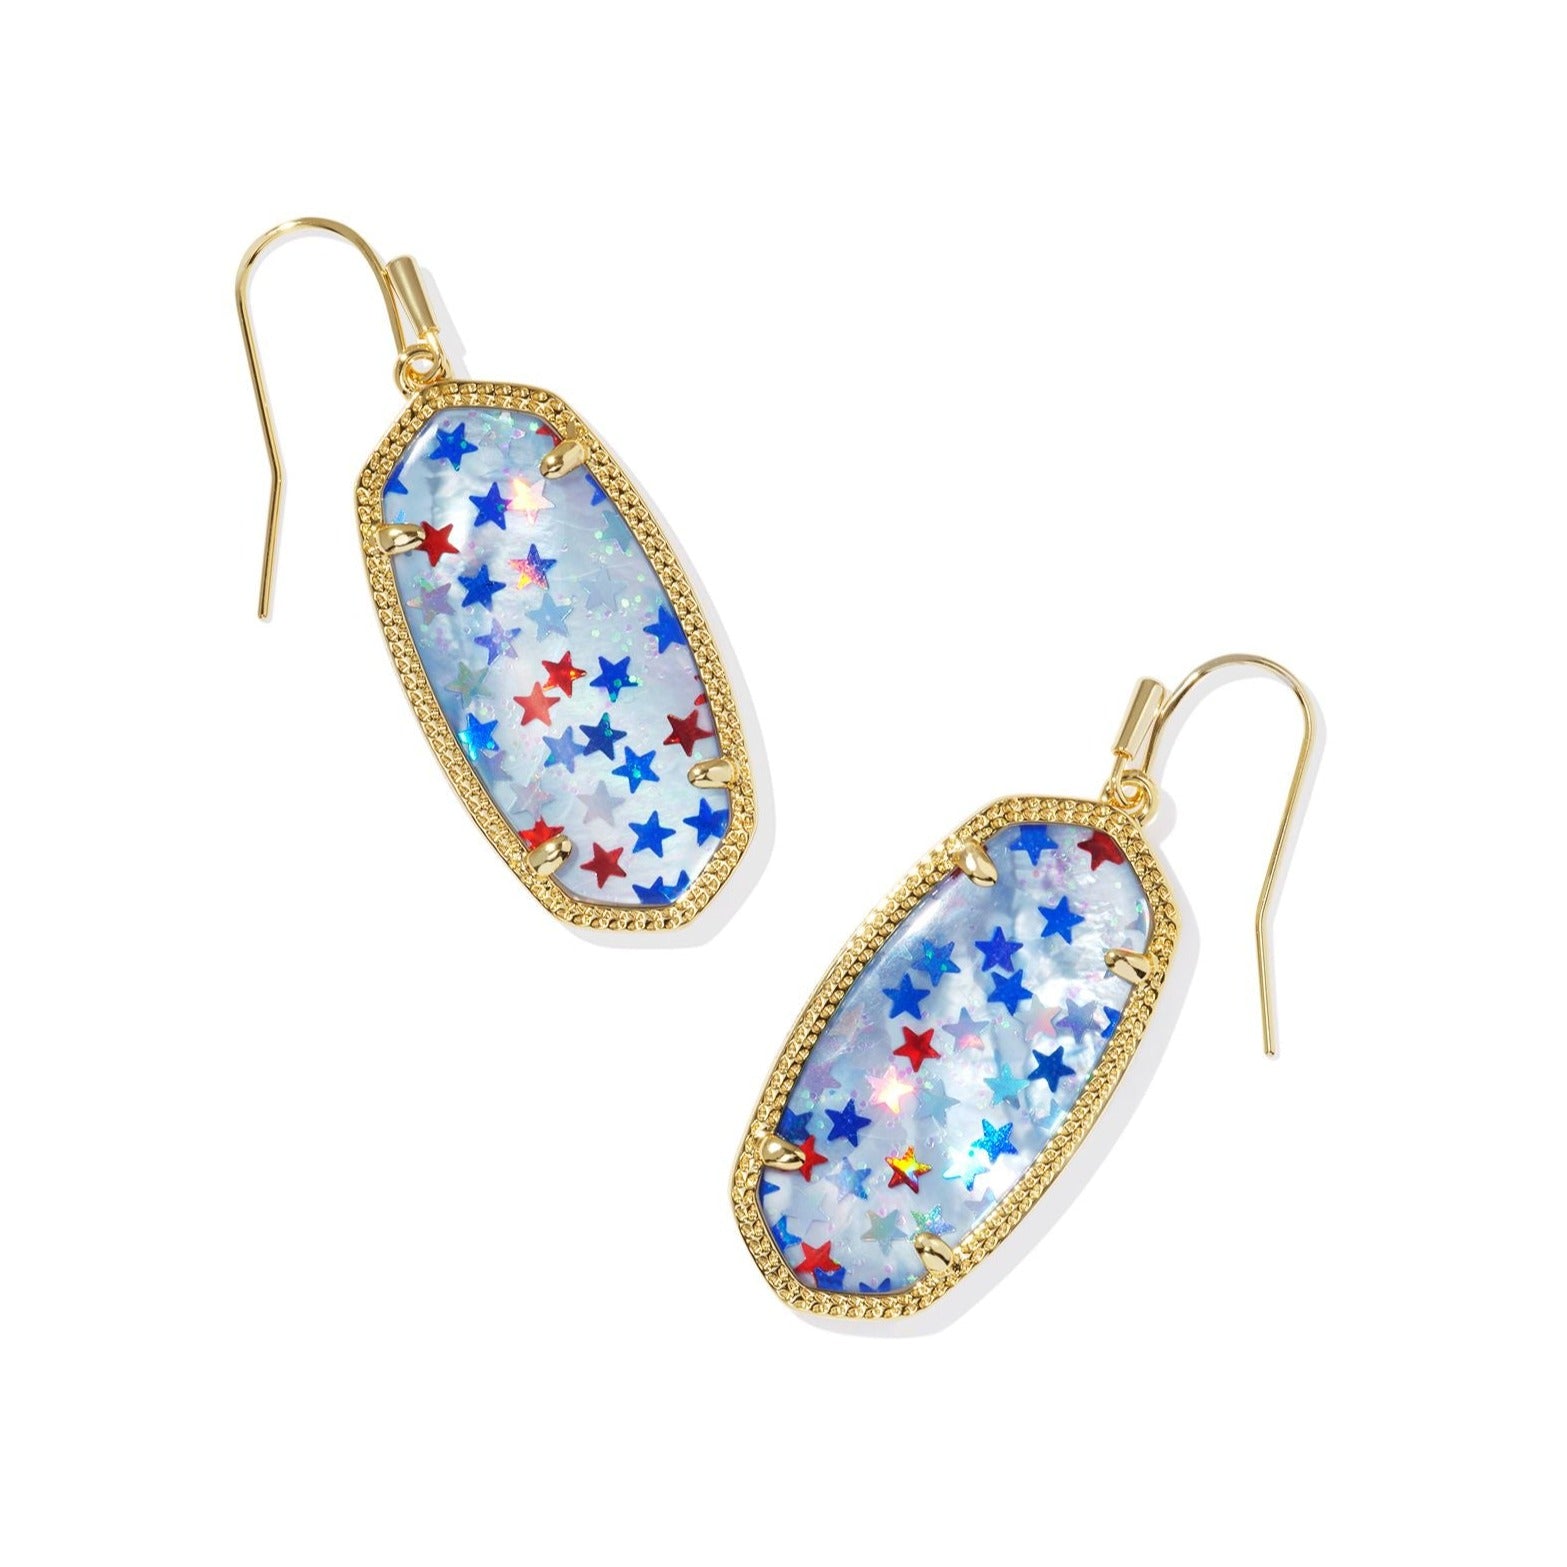 Kendra Scott | Elle Drop Earrings in Red, White, and Blue Star Illusion - Giddy Up Glamour Boutique